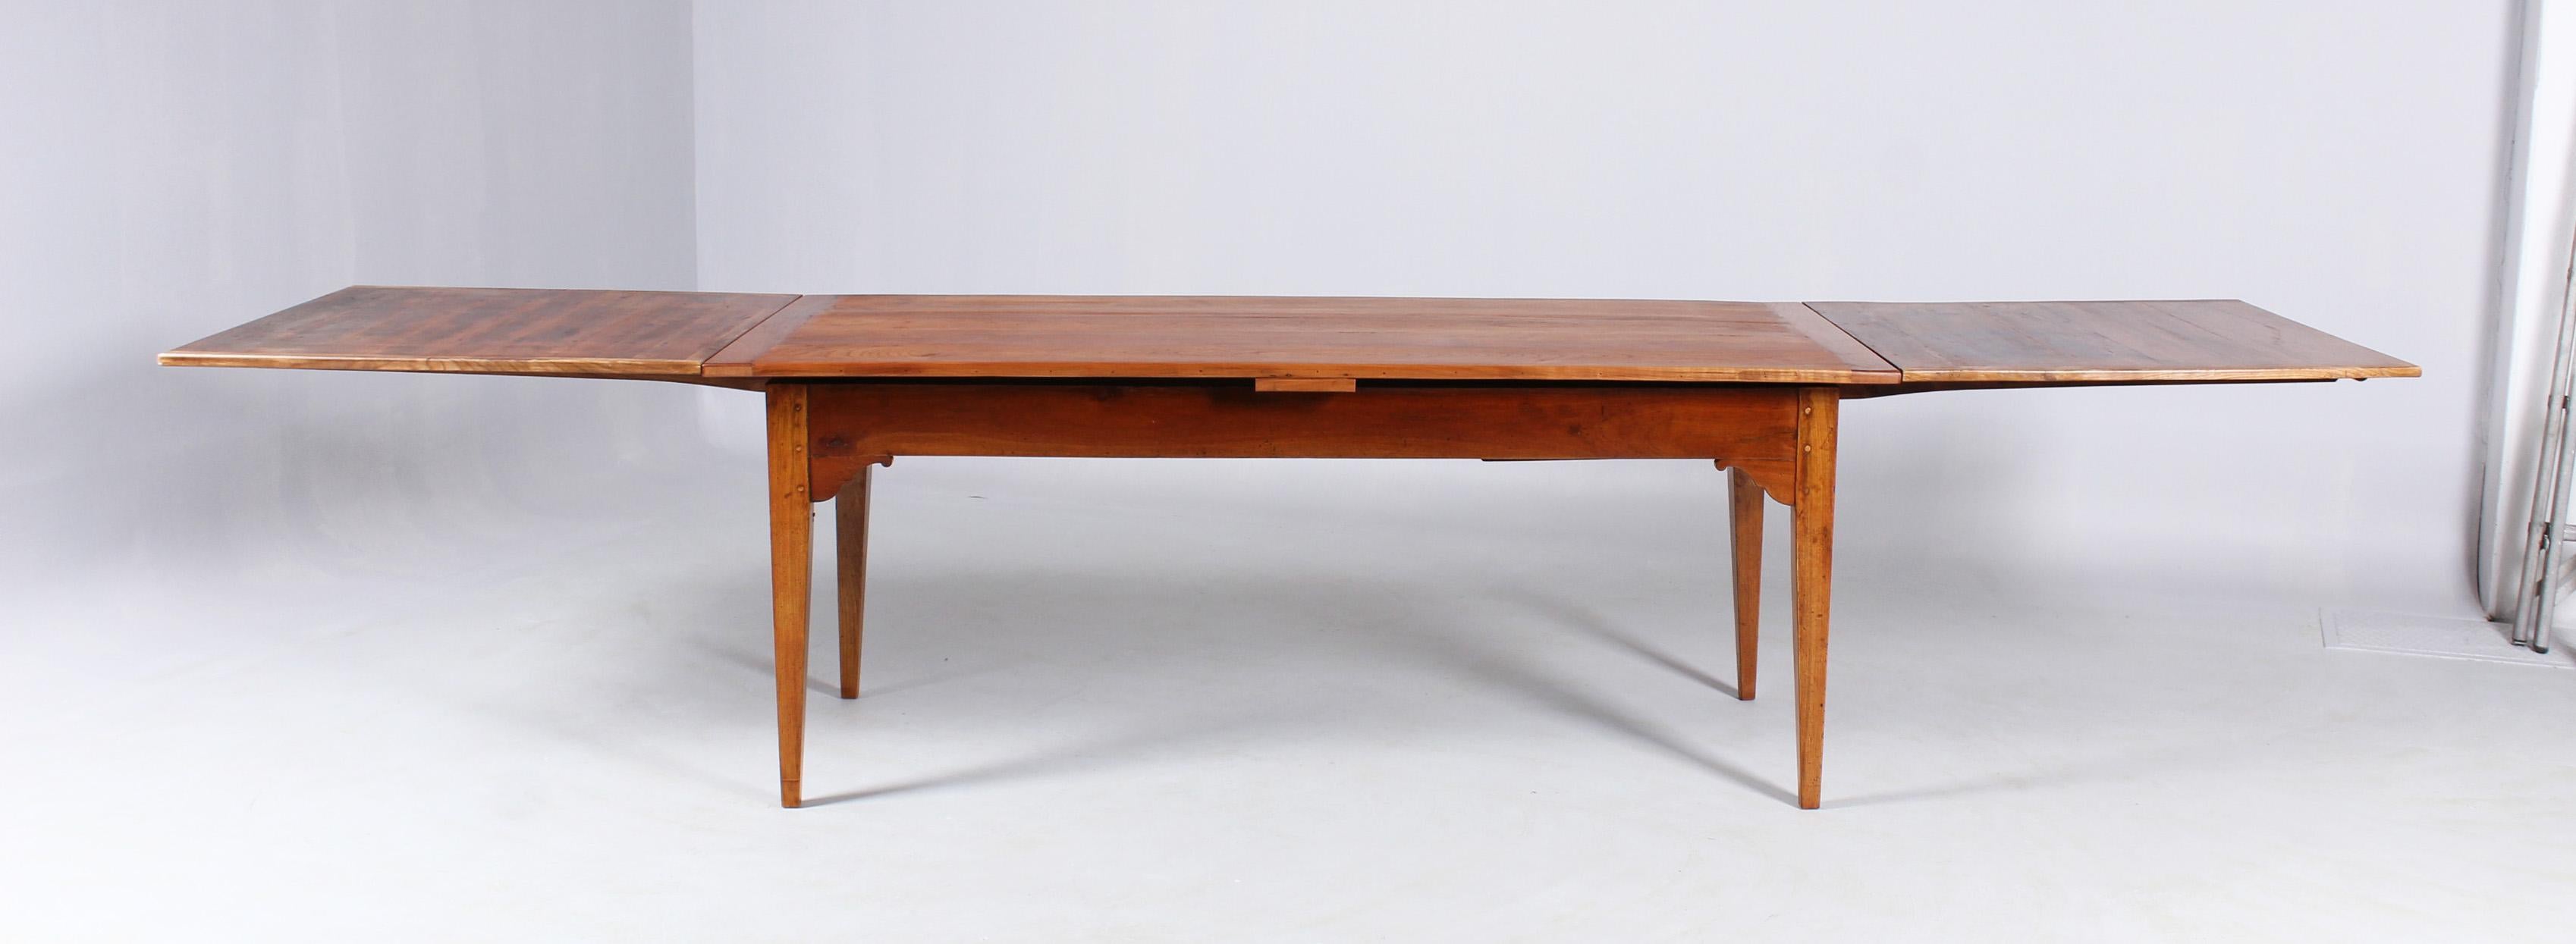 French 19th Century Extendable Farm Table, for up to 12 people, Cherrywood